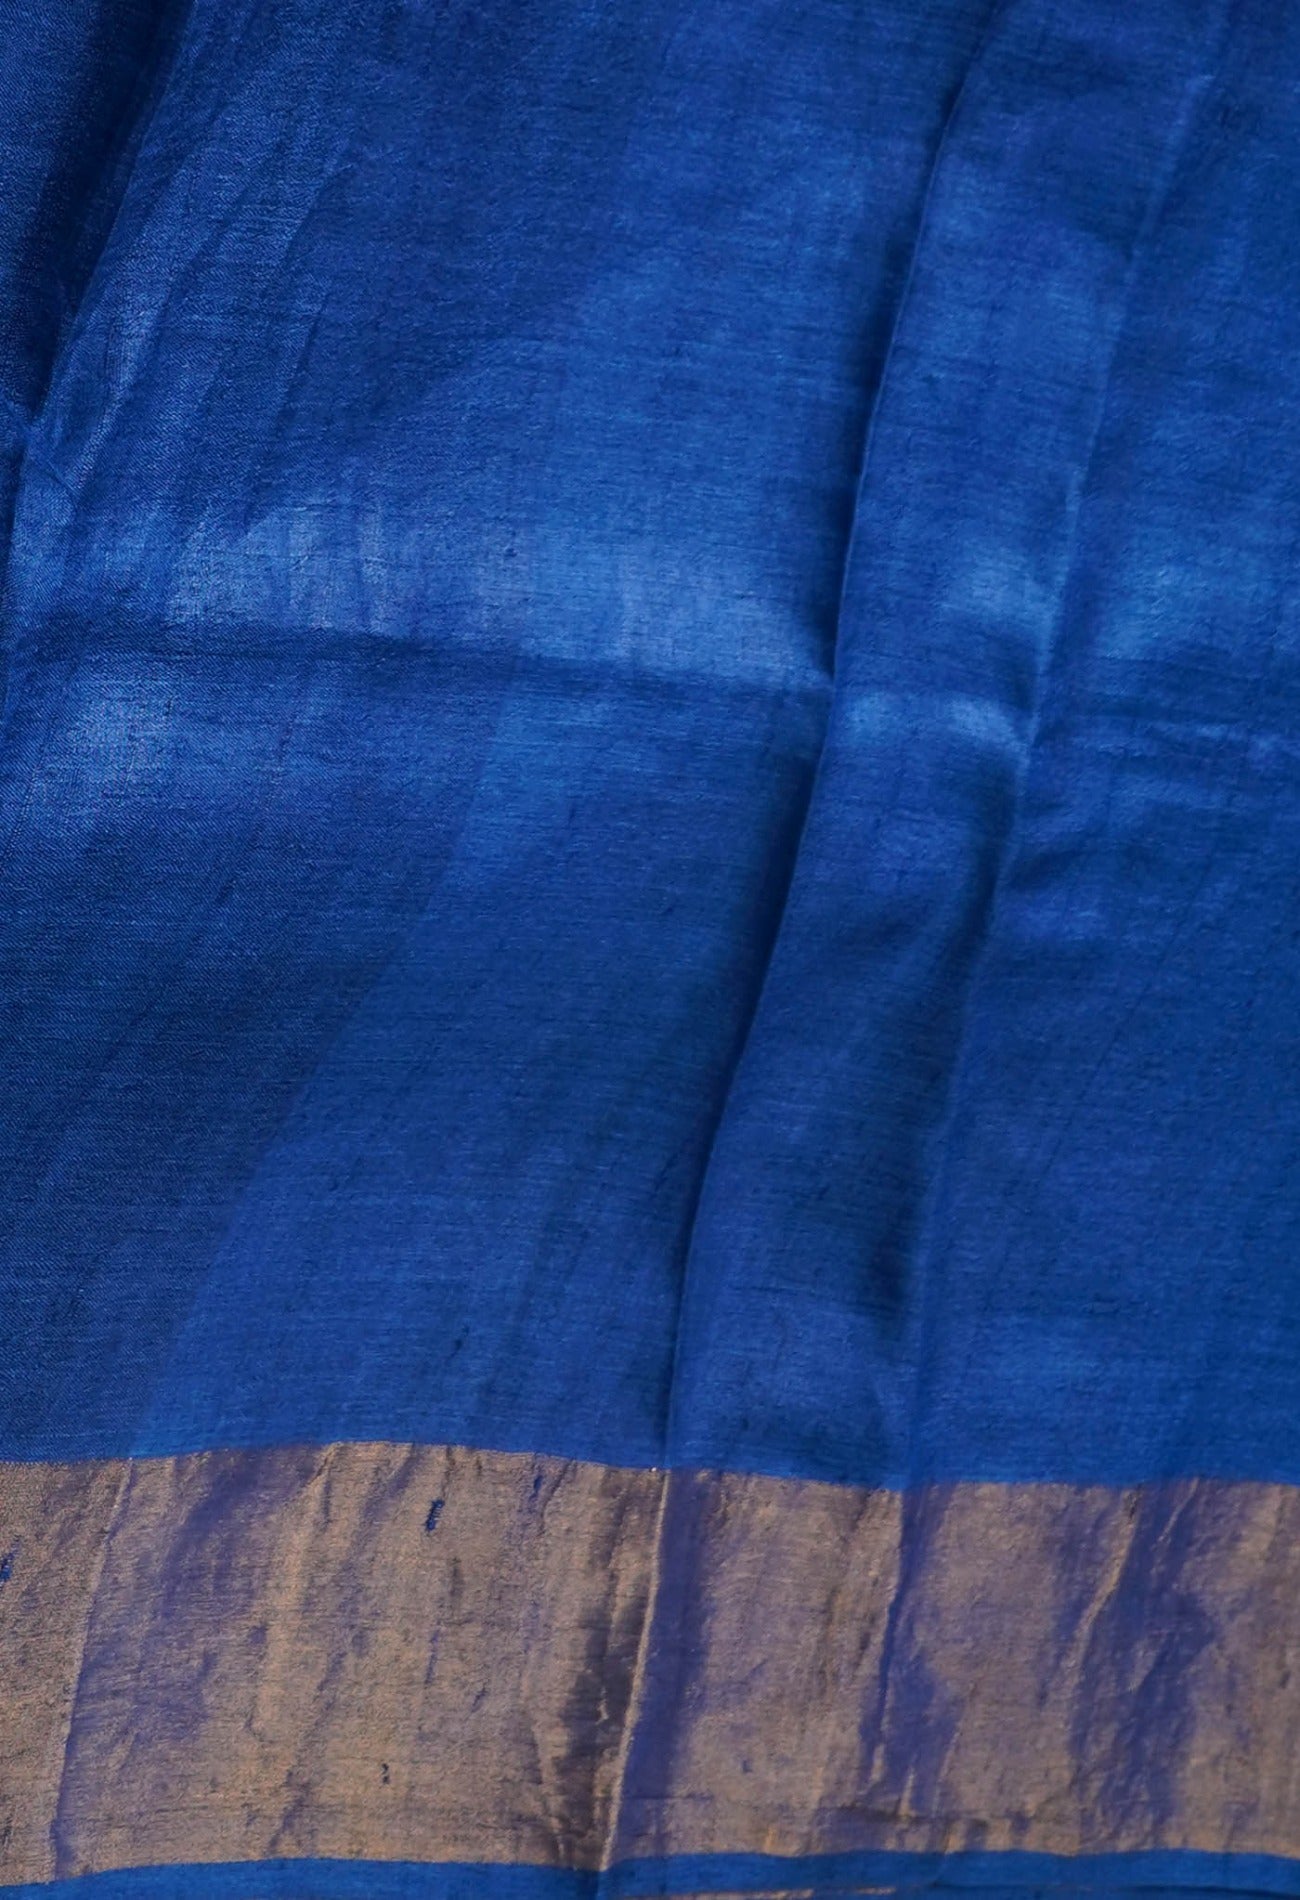 Online Shopping for Navy Blue Pure Handloom Bengal Tussar Silk Saree with Hand Block Prints from West Bengal at Unnatisilks.com India
